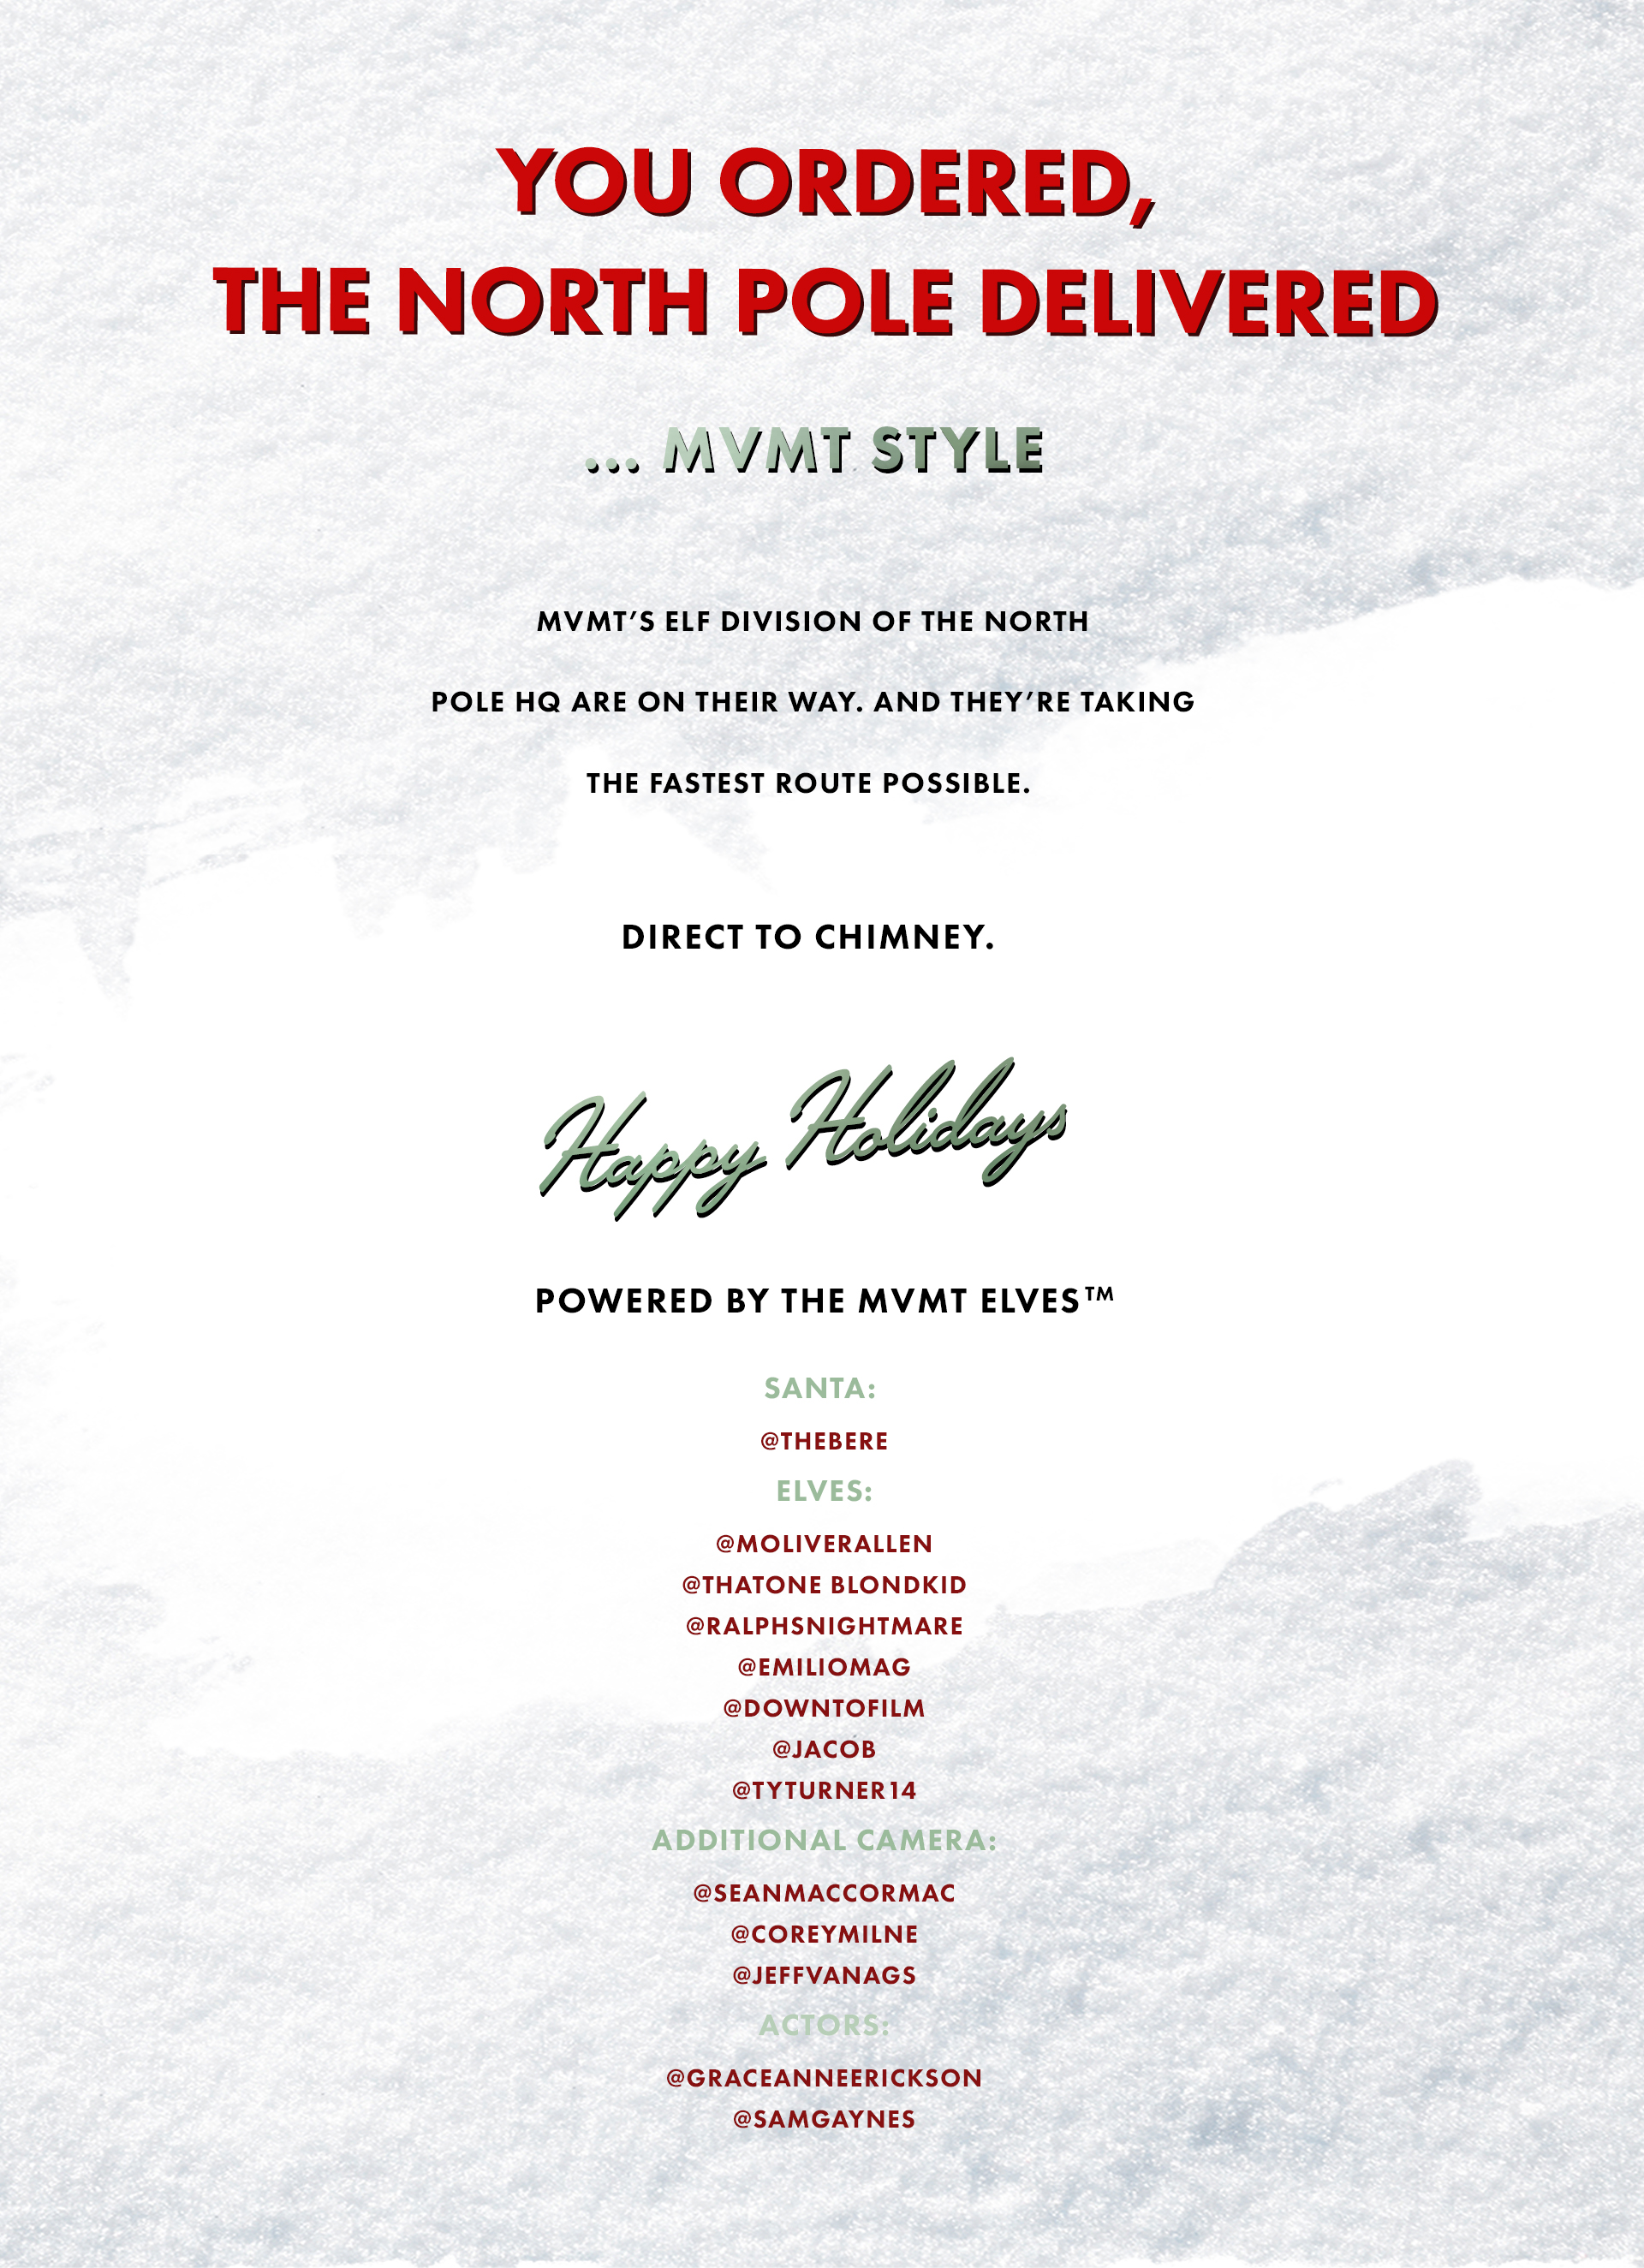 You ordered, the North Pole delivered... MVMT style. MVMT's elf division of the North Pole HQ are on their way. And they're taking the fastest route possible. Direct to chimney. Happy Holidays powered by the MVMT elves (tm). Santa: @thebere Elves: @moliverallen @thatoneblondkid @ralphsnightmare @emiliomag @downtofilm @jacob @tyturner14 Additional Camera: @seanmaccormac @coreymilne @jeffvanags Actors: @graceanneerickson @samgaynes